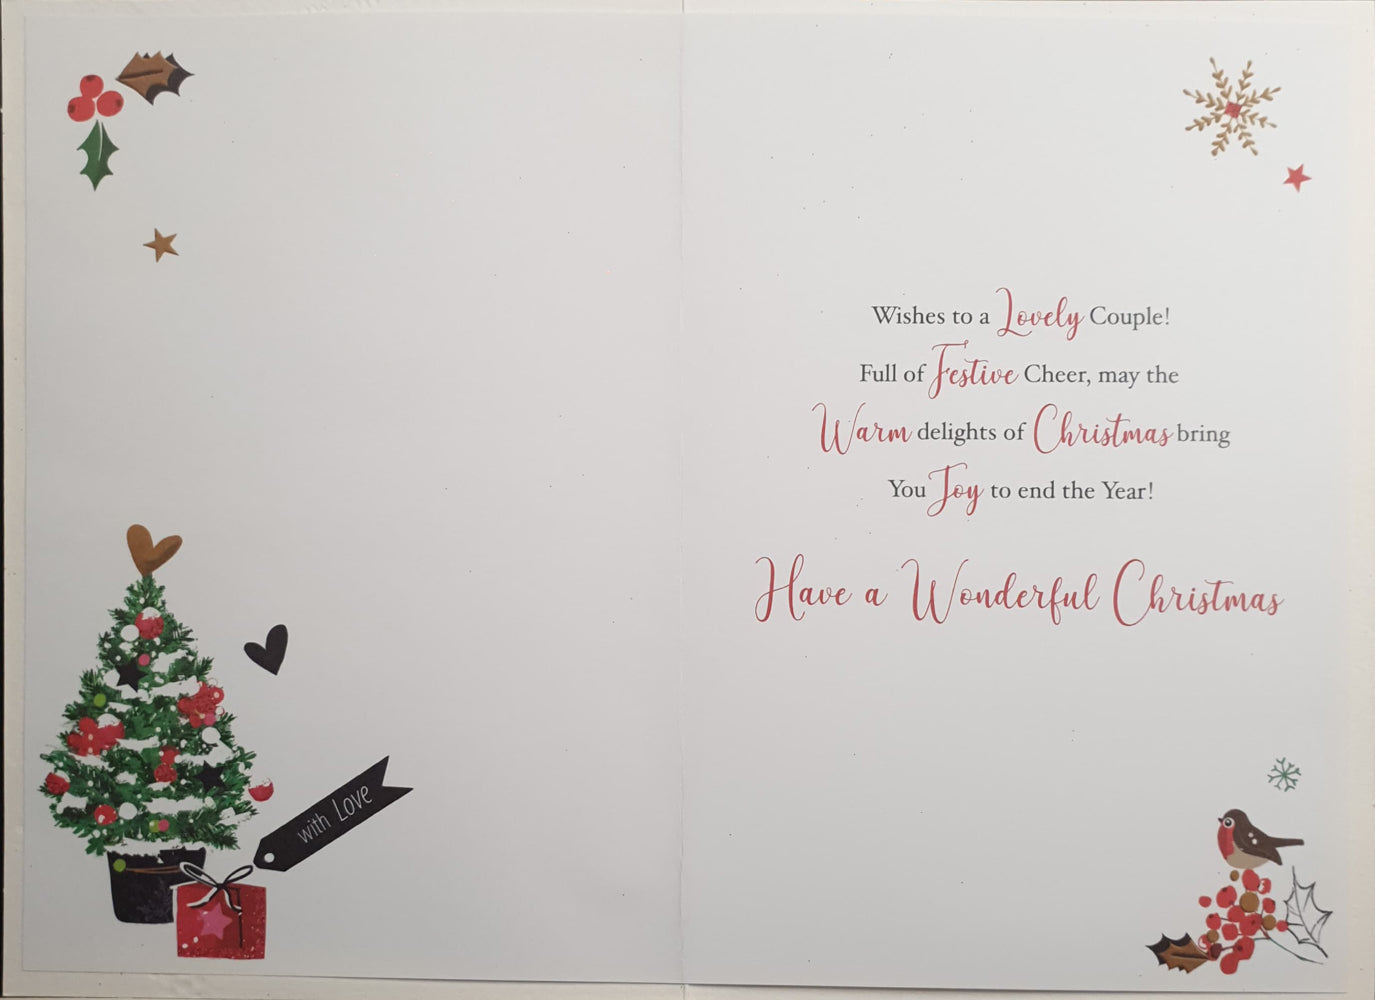 Special Son And Daughter In Law Christmas Card - Red Door & Tree With Birds